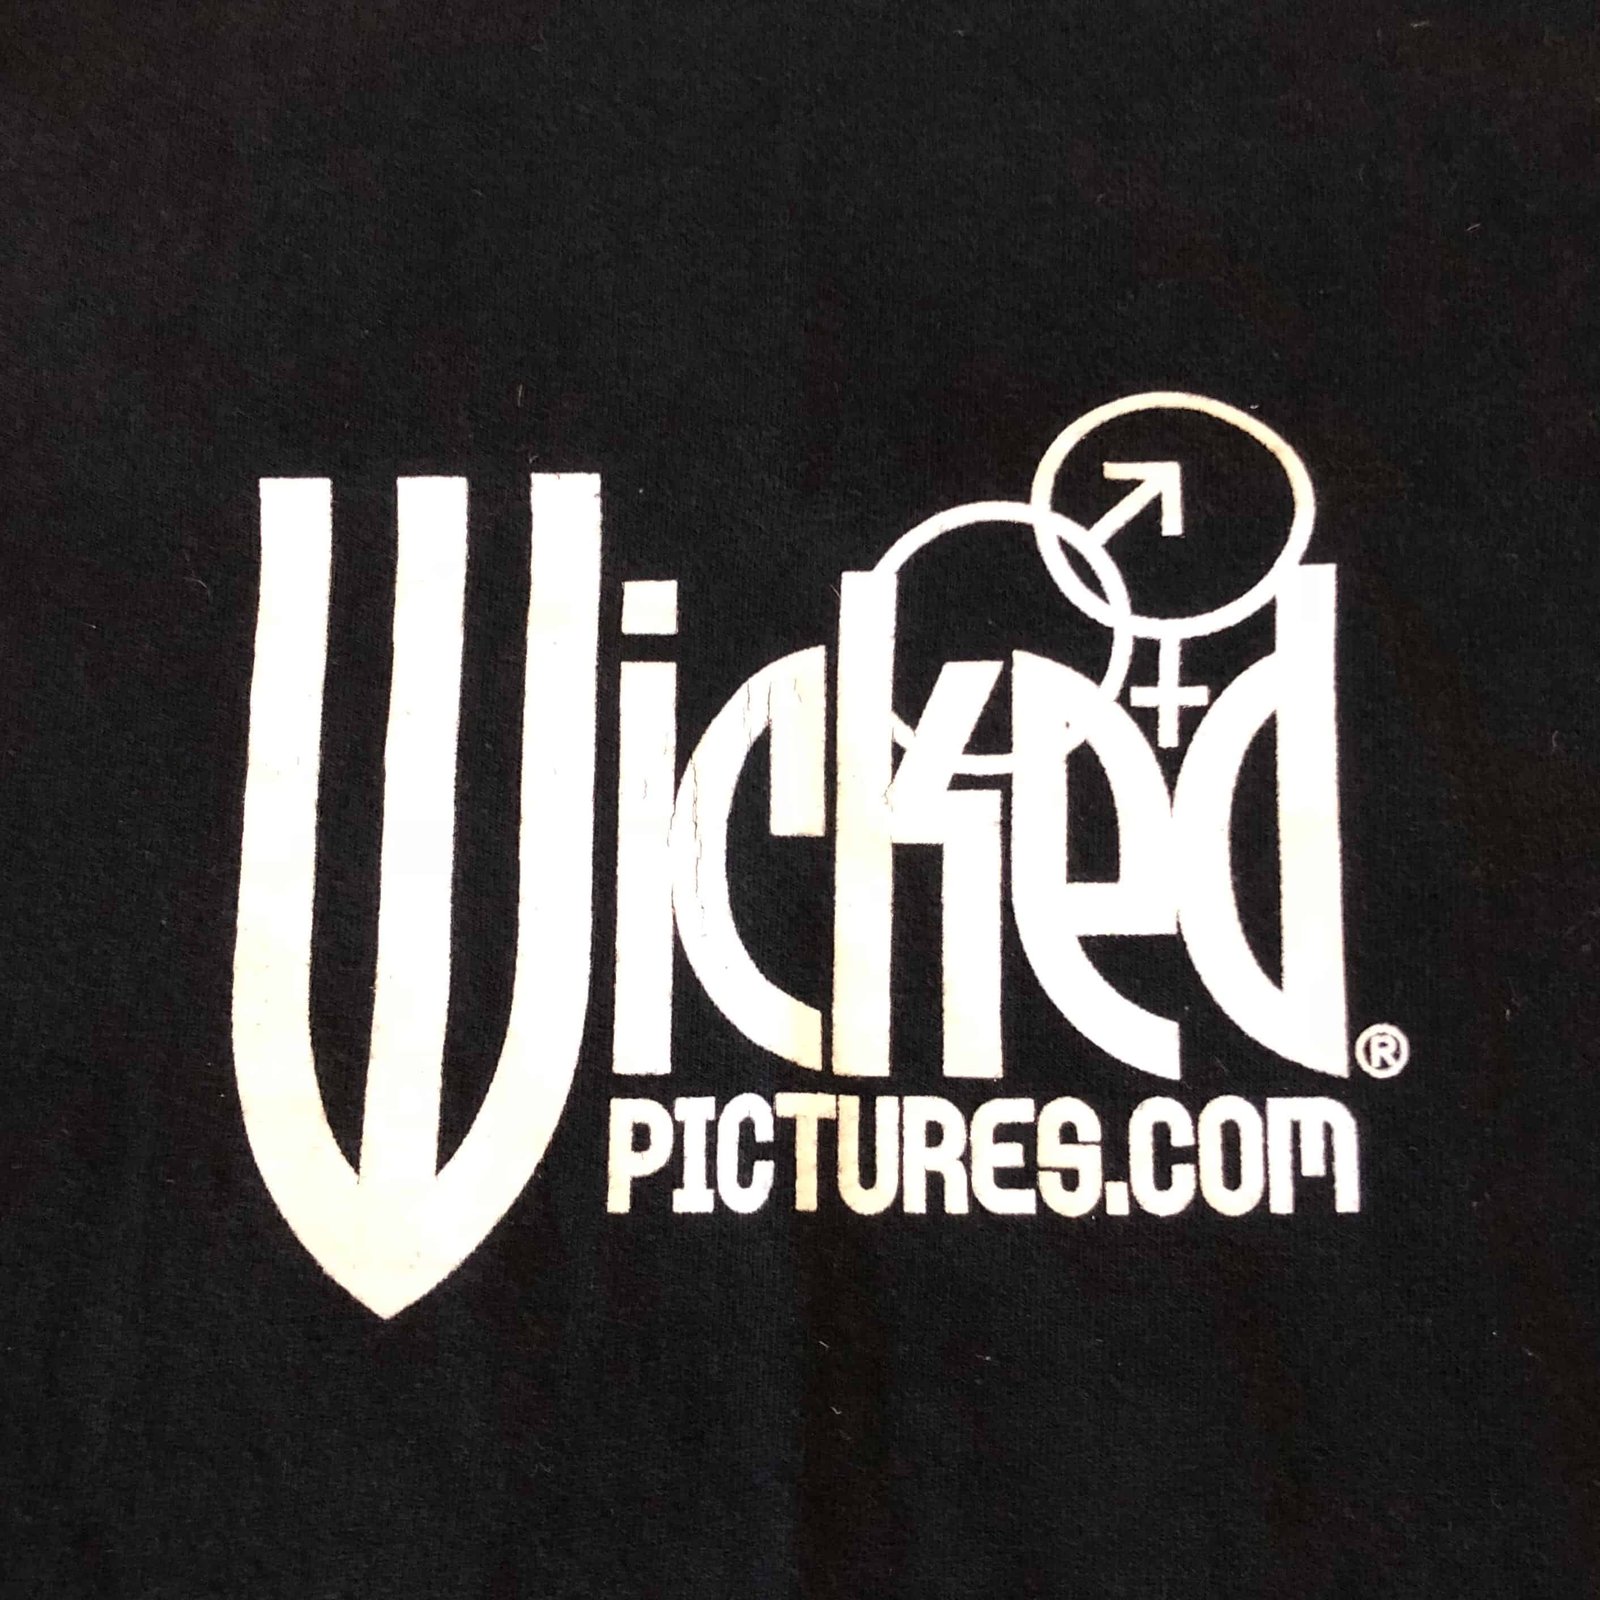 wicked pictures logo